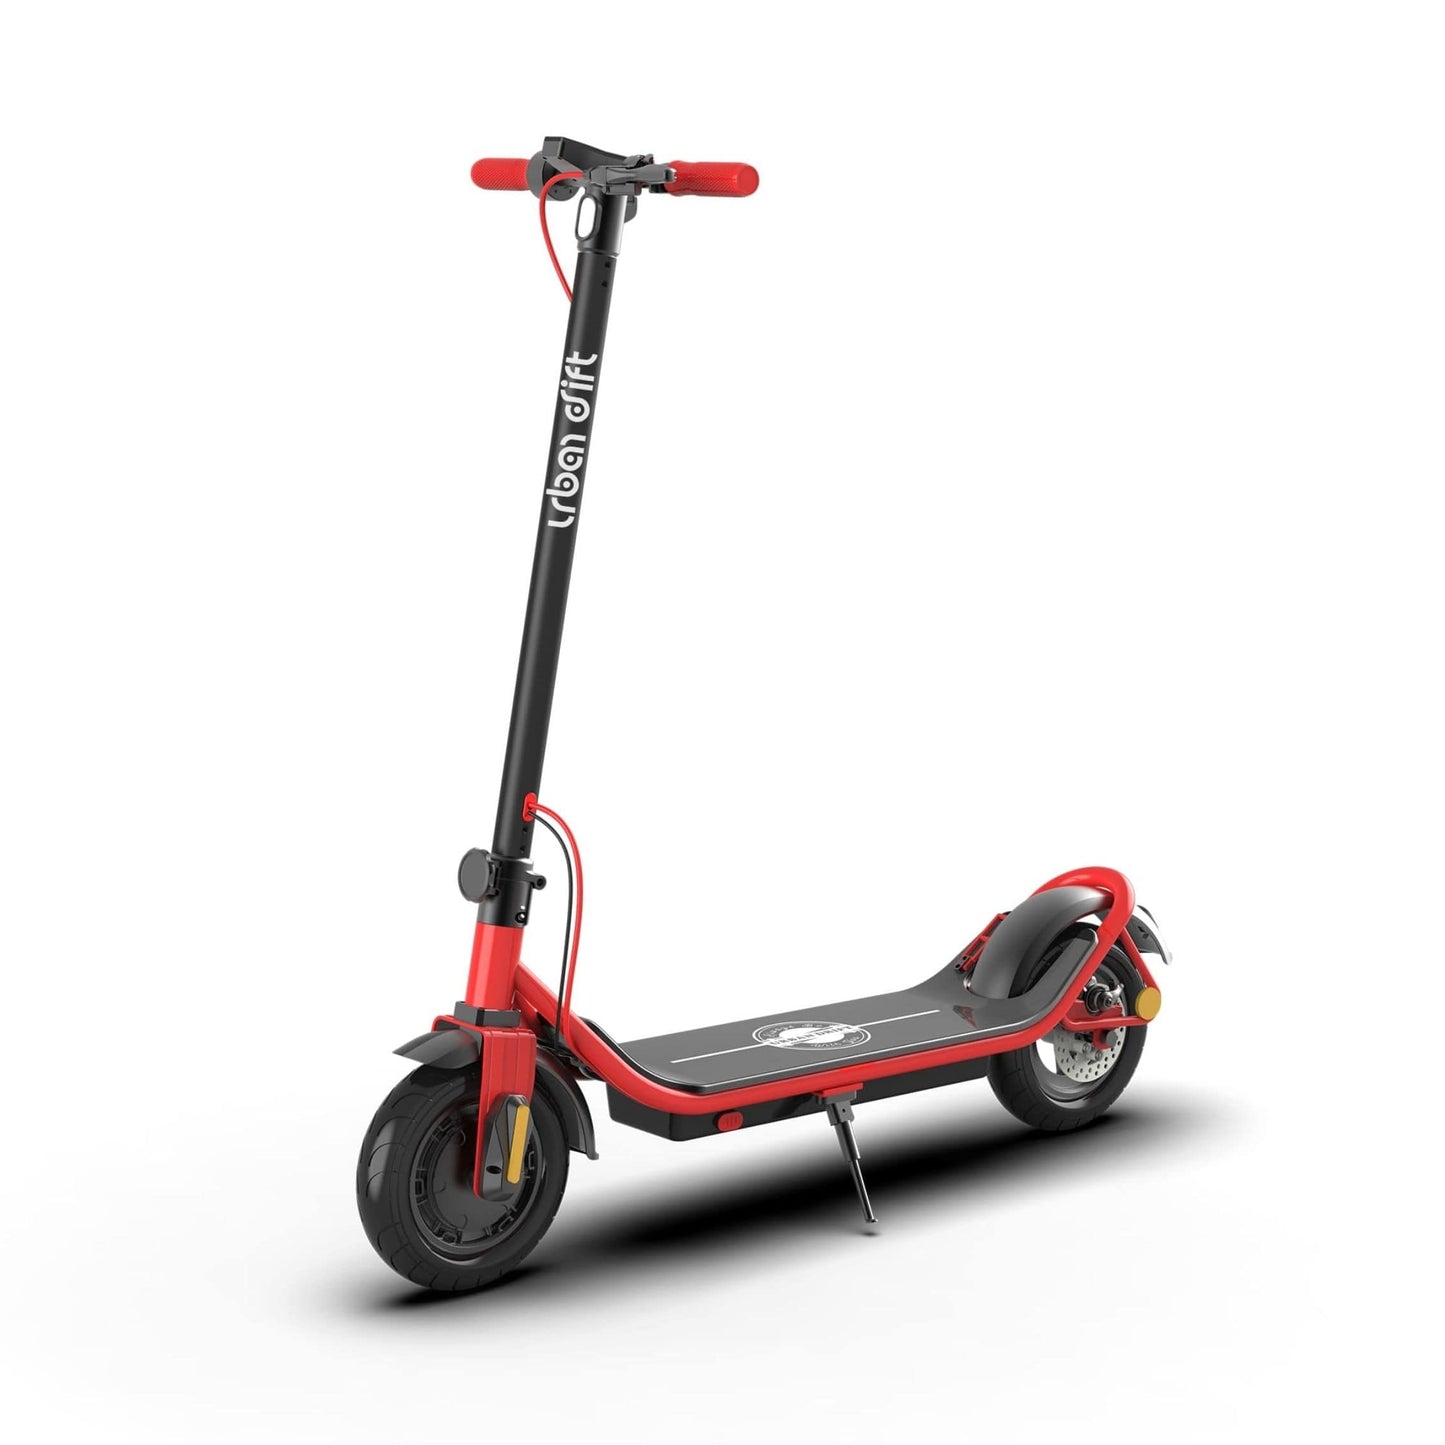 Urban Drift S006 Electric Scooter